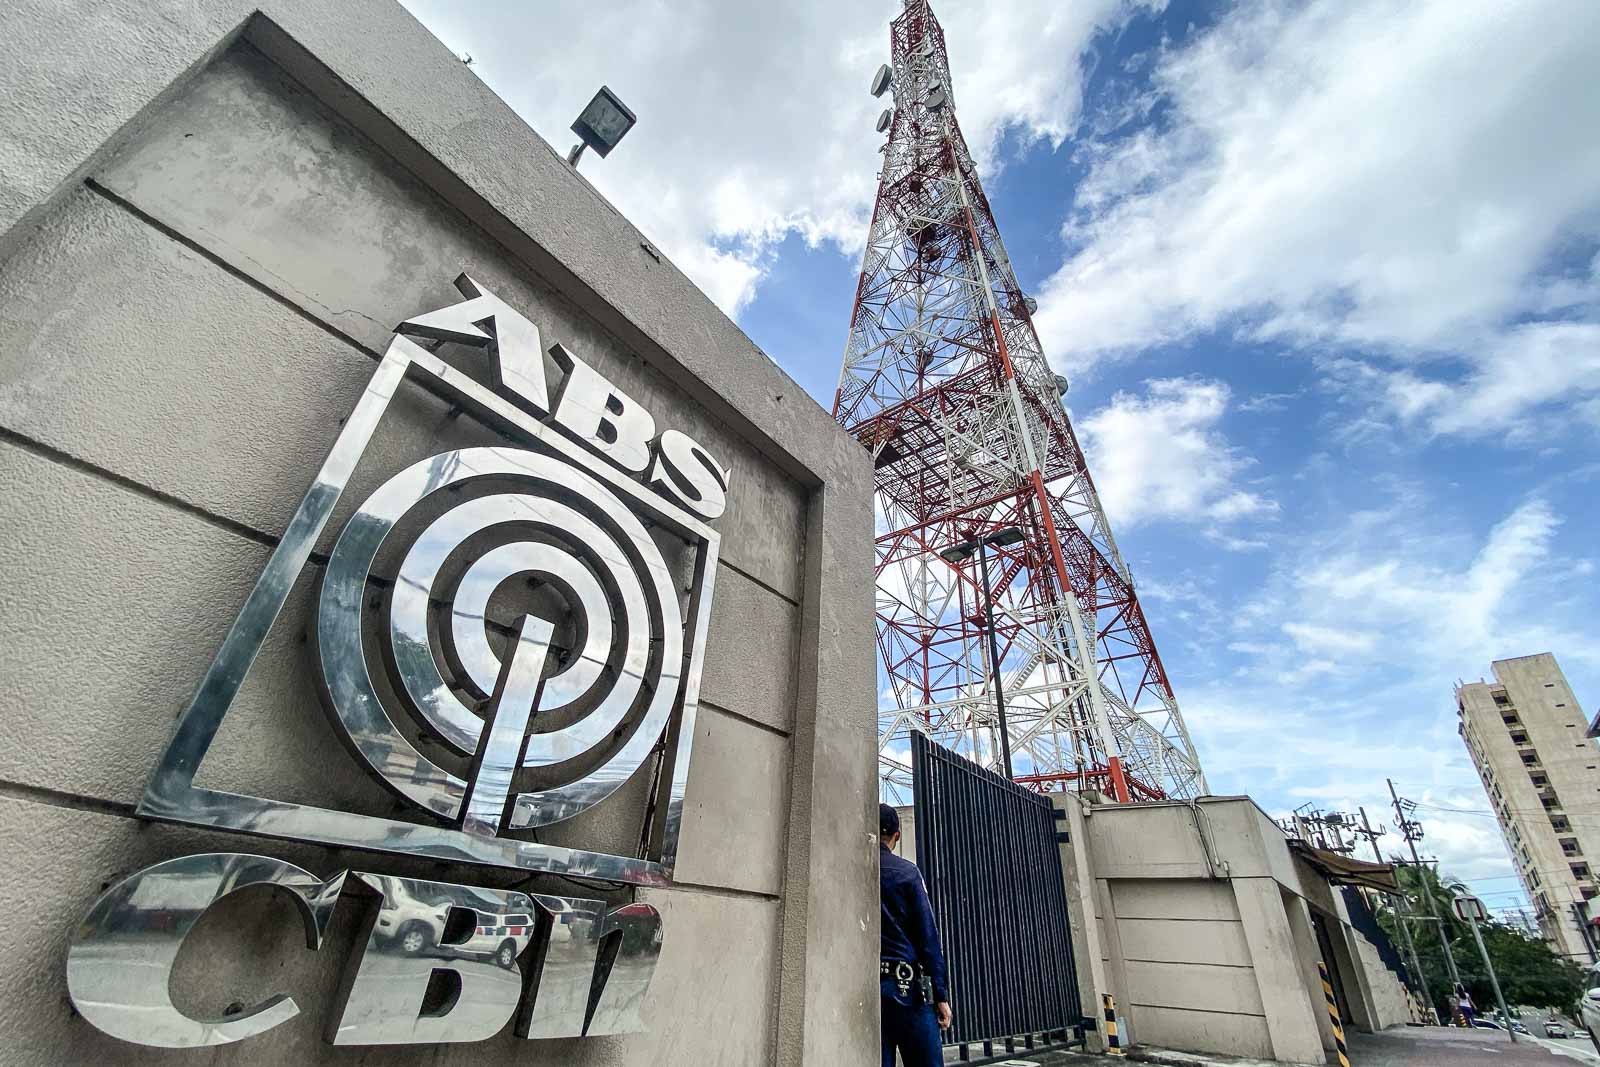 FRANCHISE RENEWAL. The ABS-CBN Broadcasting Center in Quezon City. Photo by Jire Carreon/Rappler 